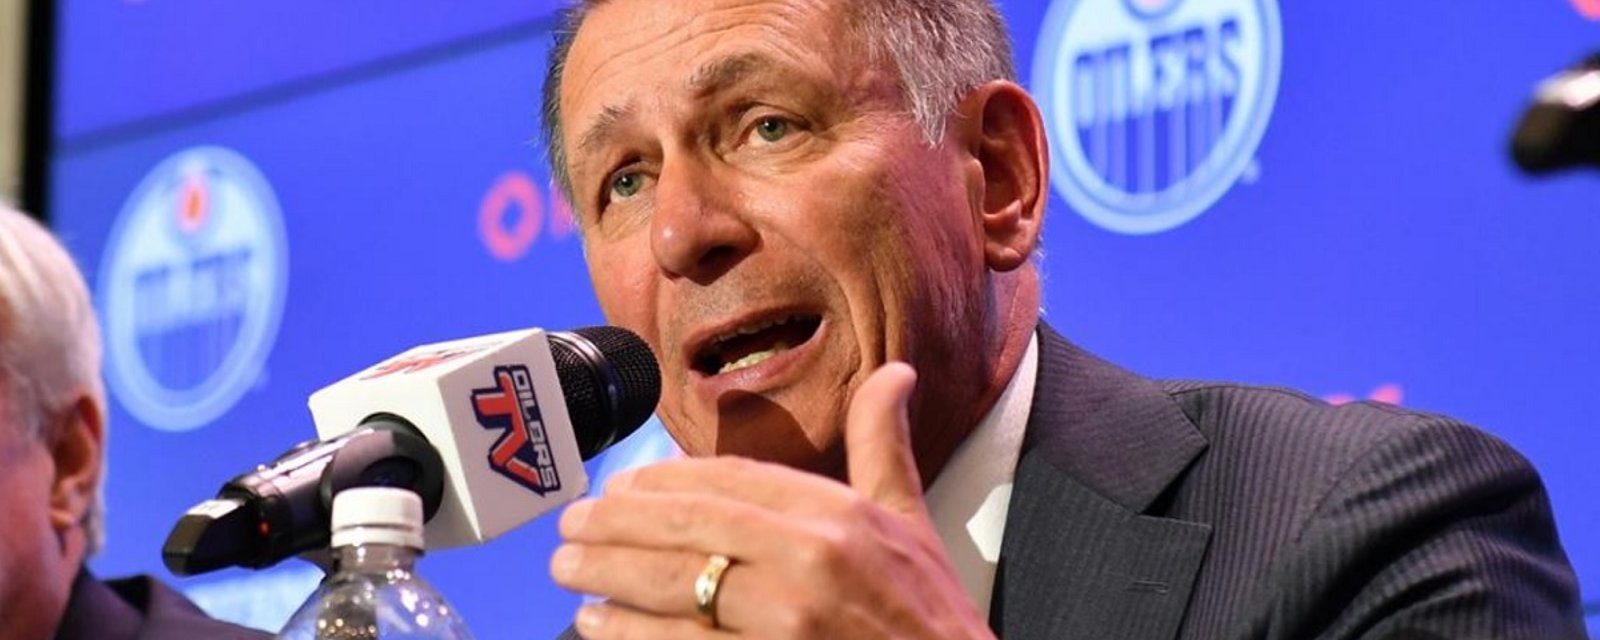 Ken Holland shares his thoughts on potential buyouts for the Oilers.